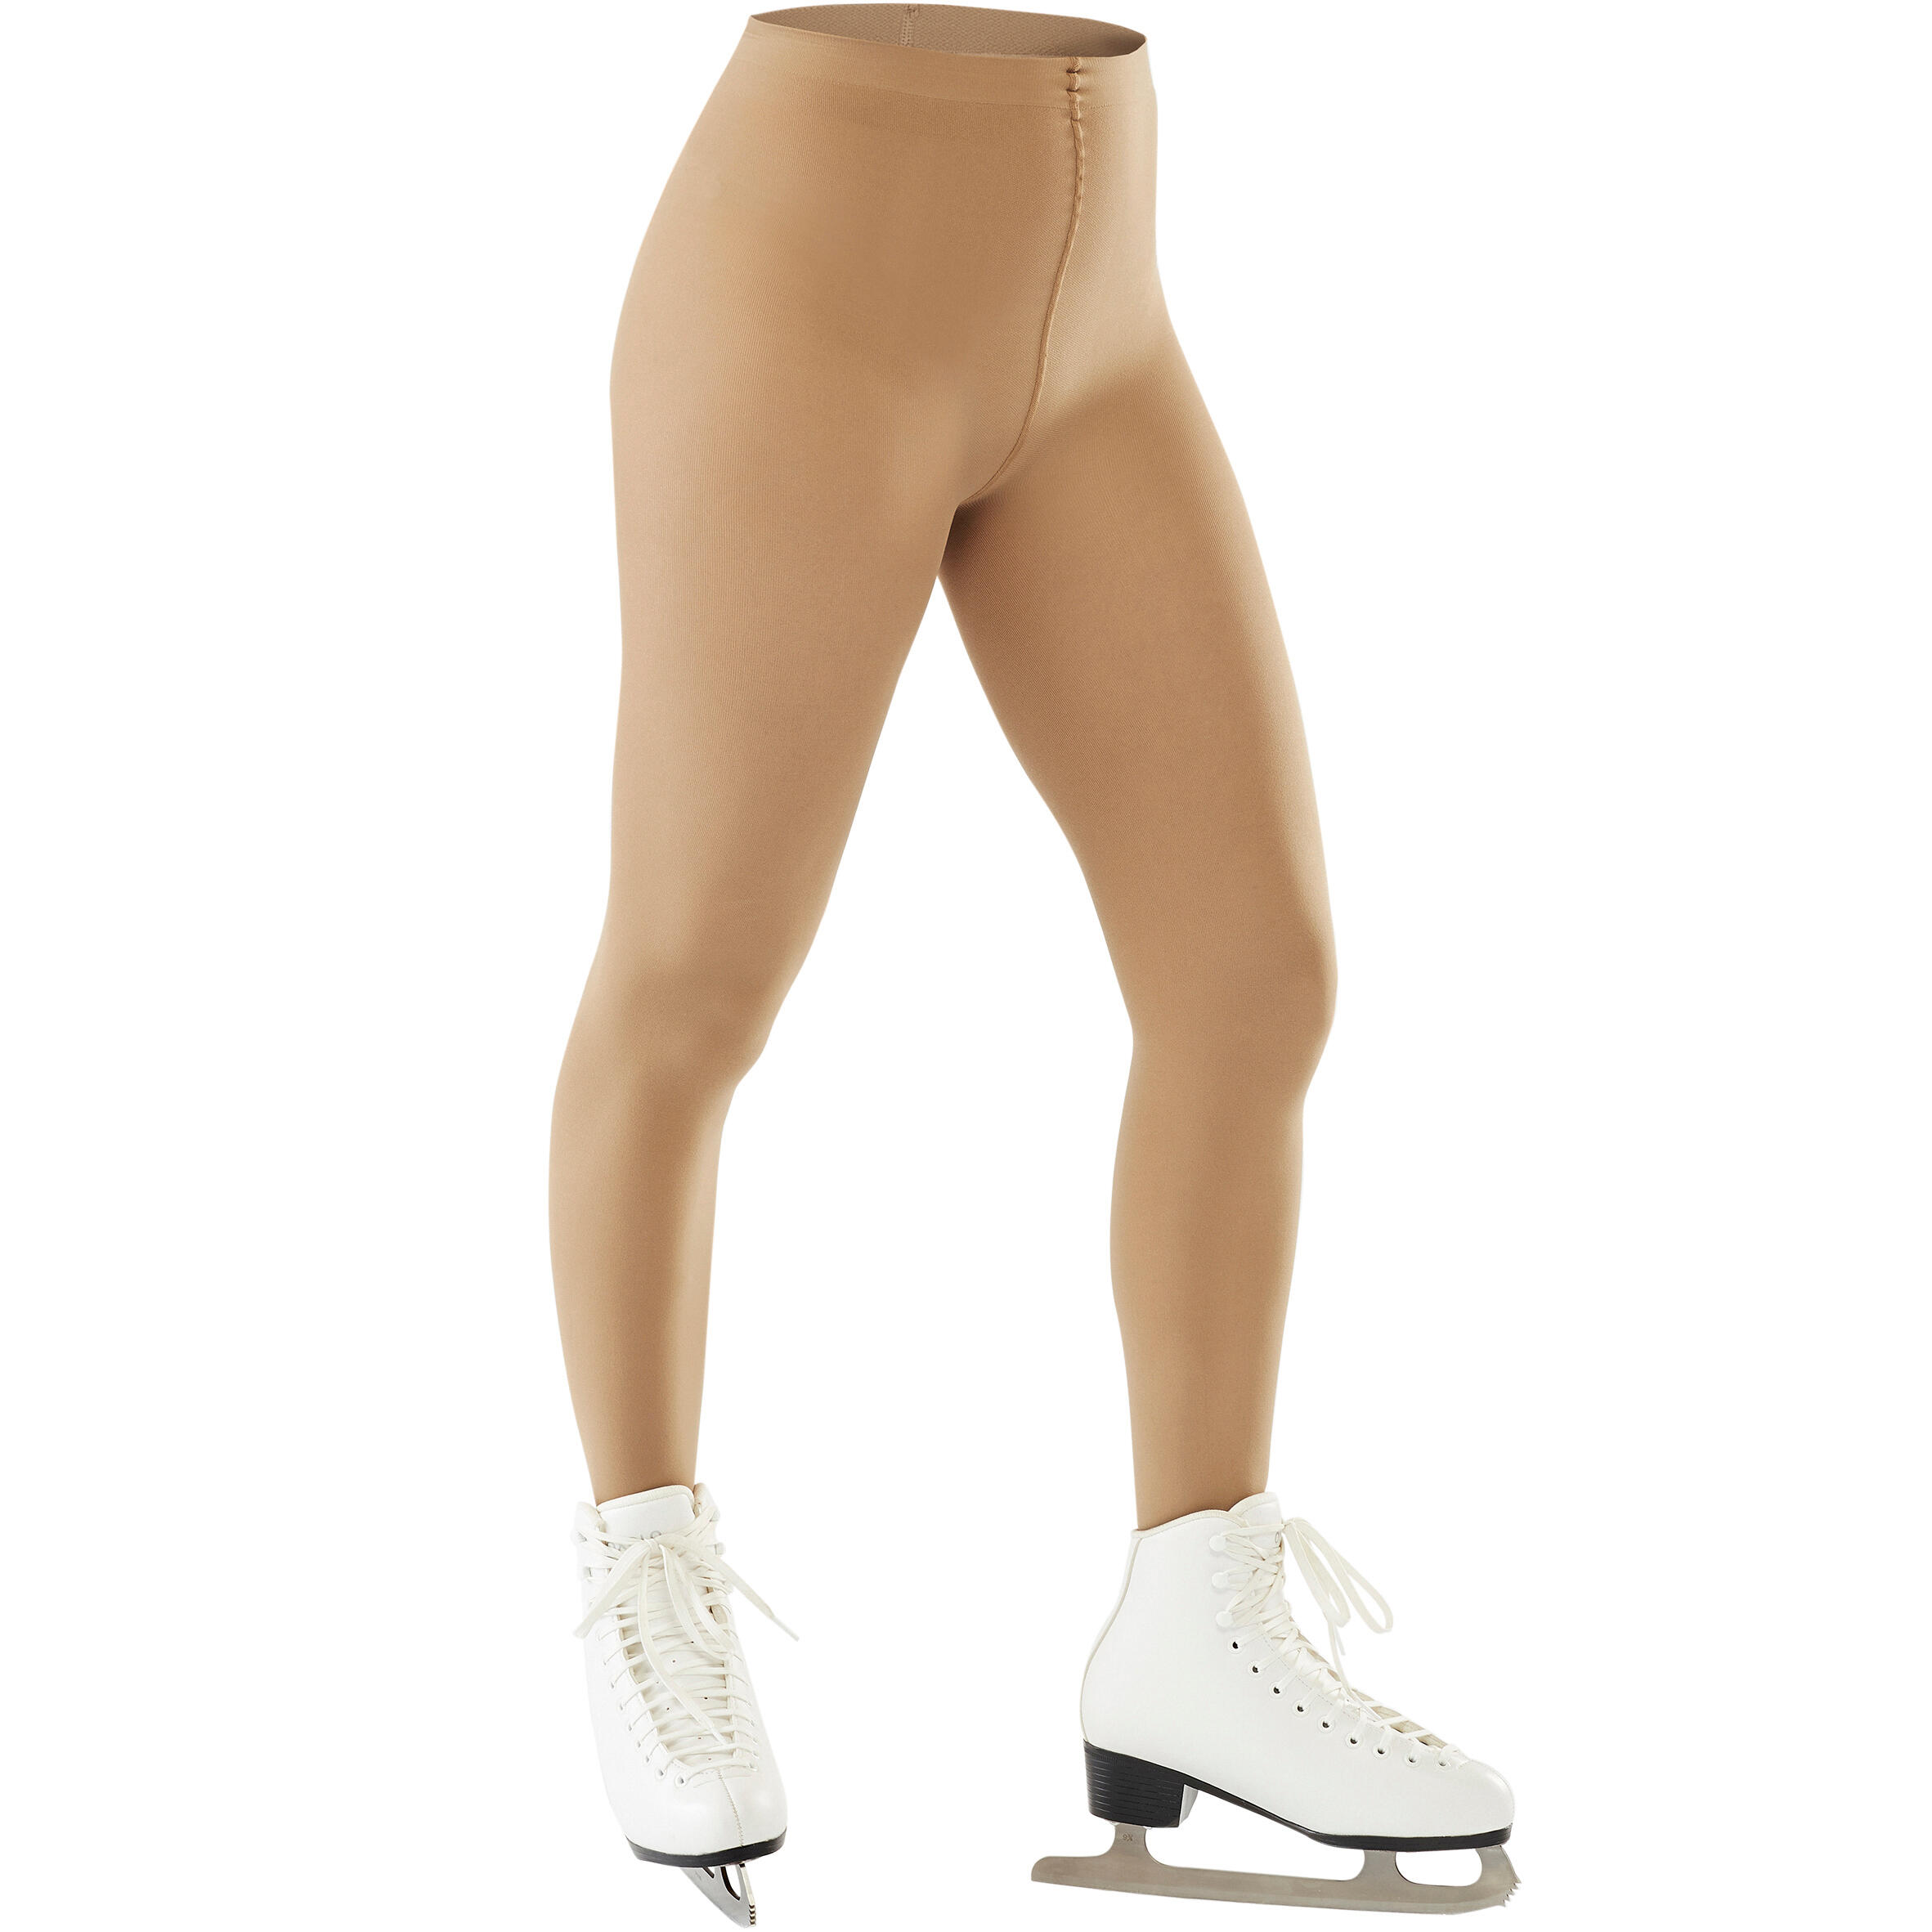 AXELYS Adult Footed Figure Skating Tights